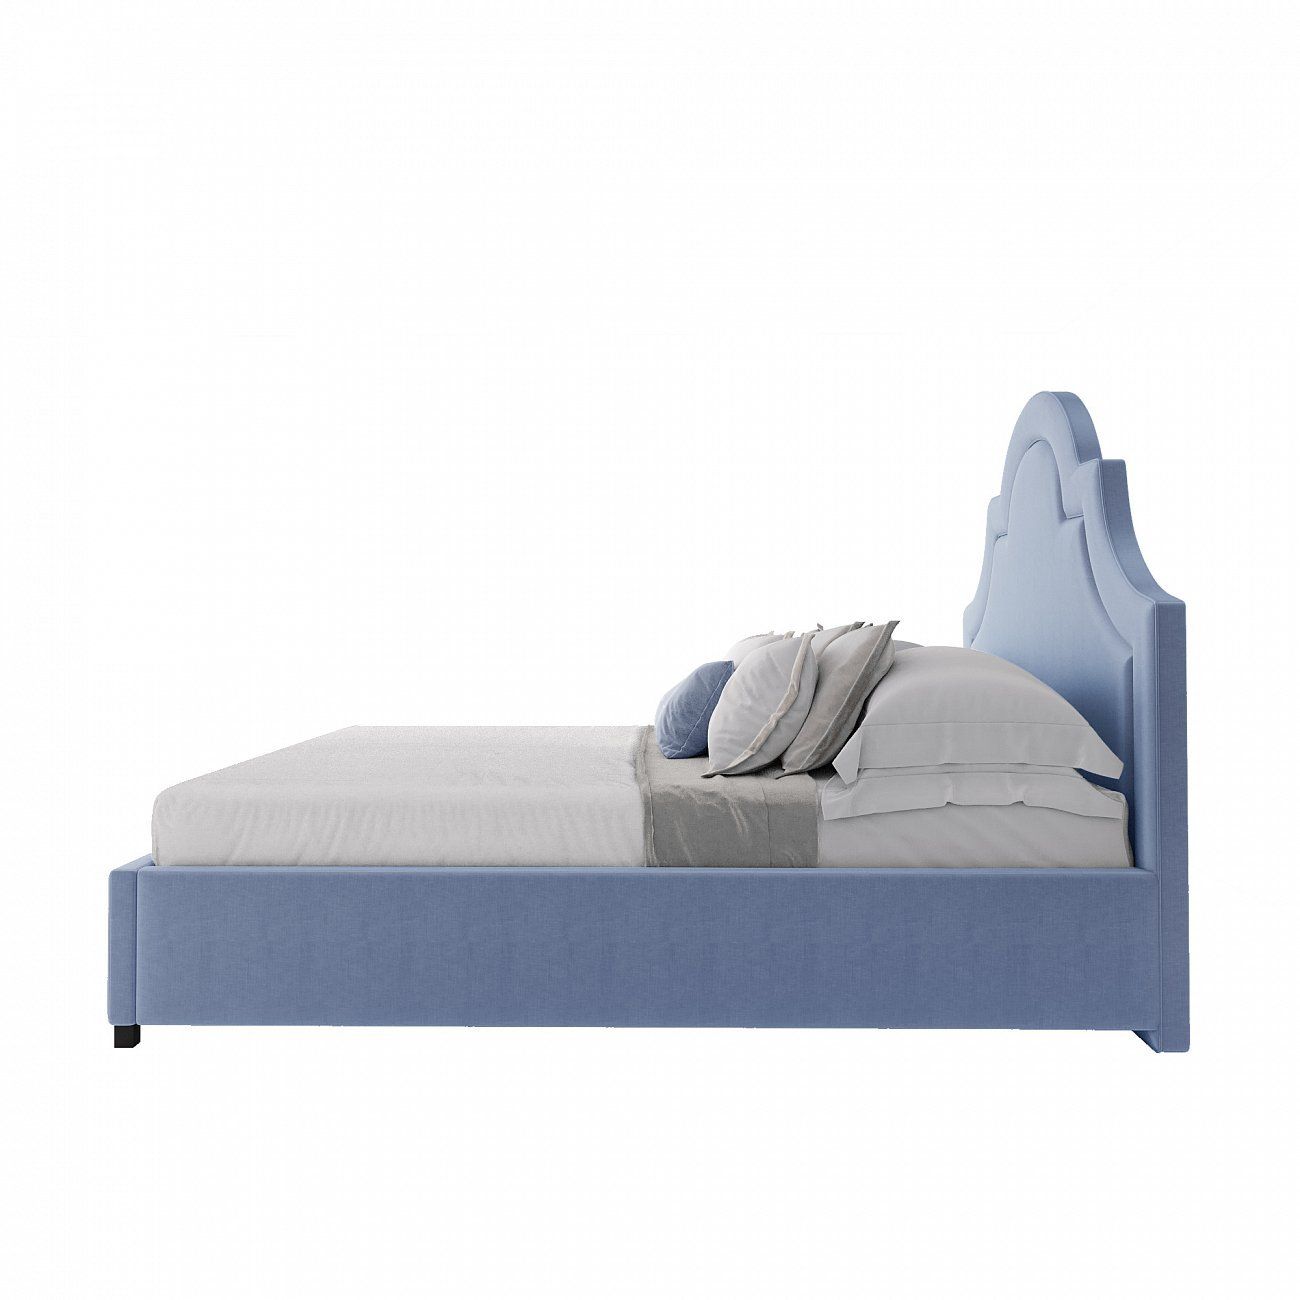 Double bed 180x200 blue Kennedy